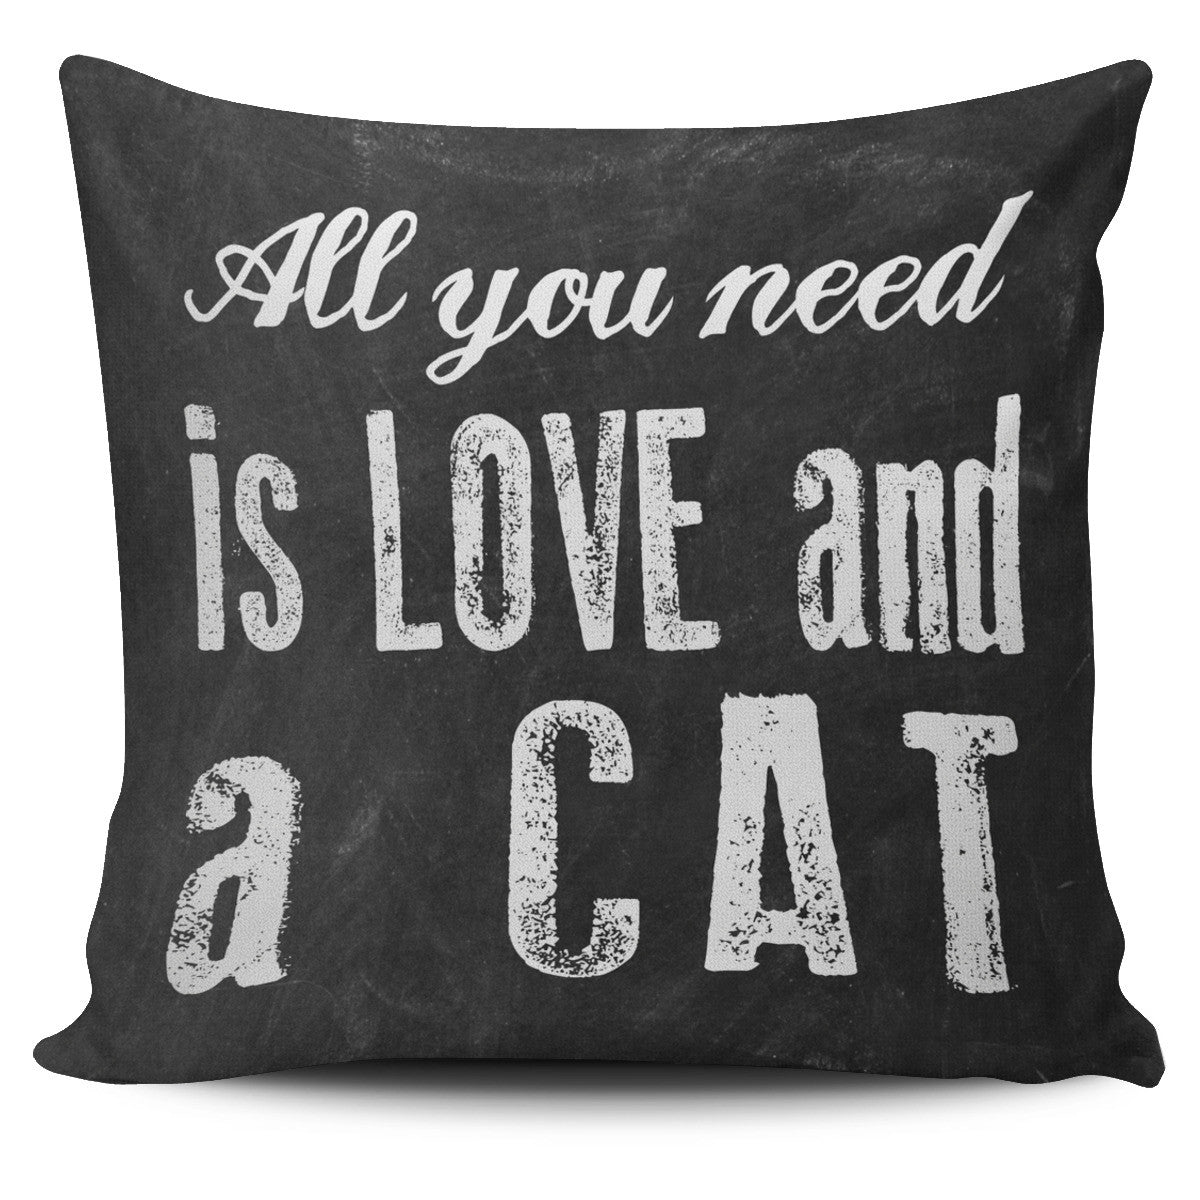 All You Need Is Love And a Cat Pillow